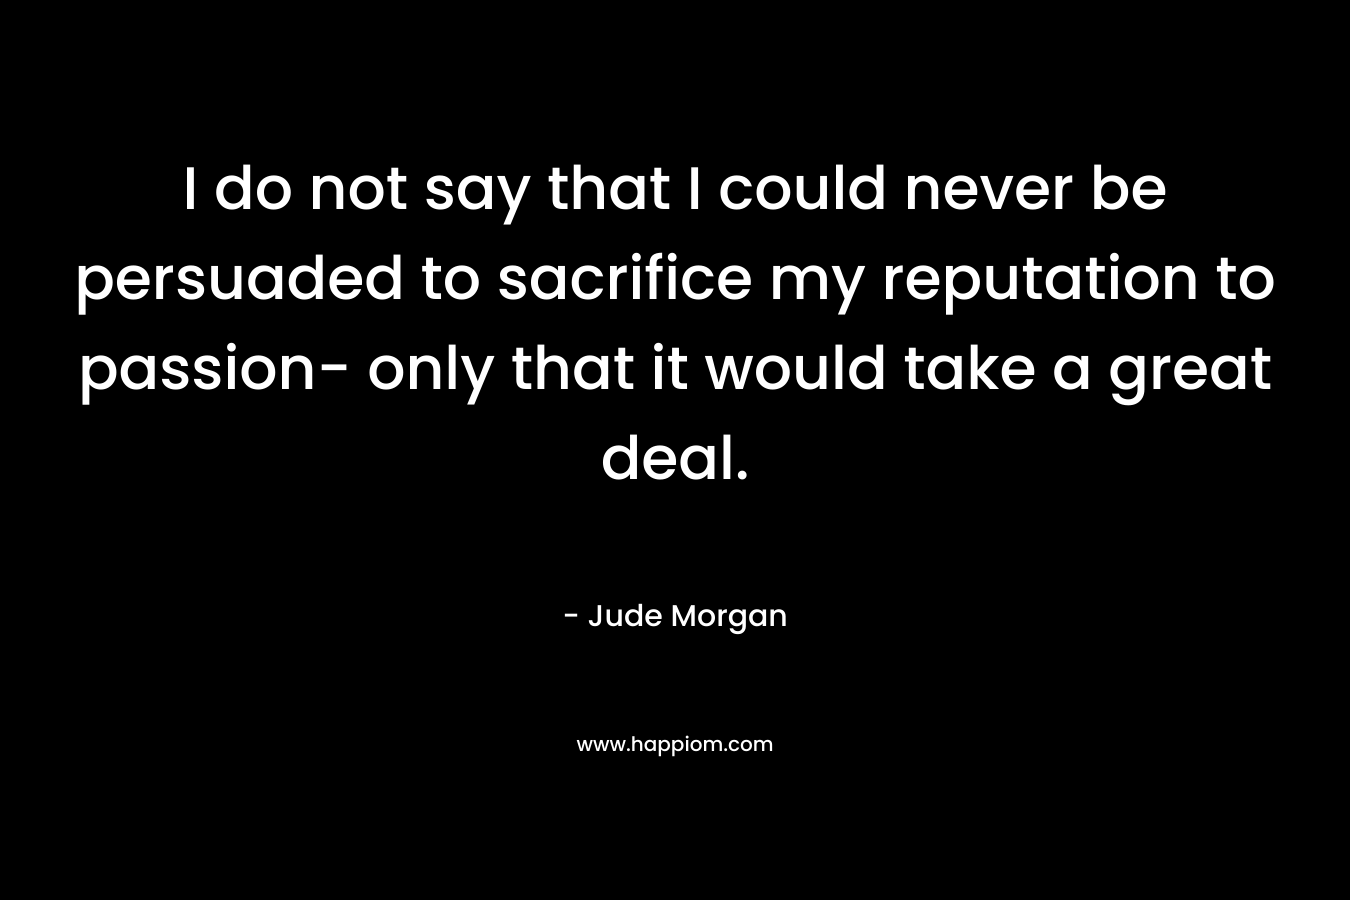 I do not say that I could never be persuaded to sacrifice my reputation to passion- only that it would take a great deal. – Jude Morgan